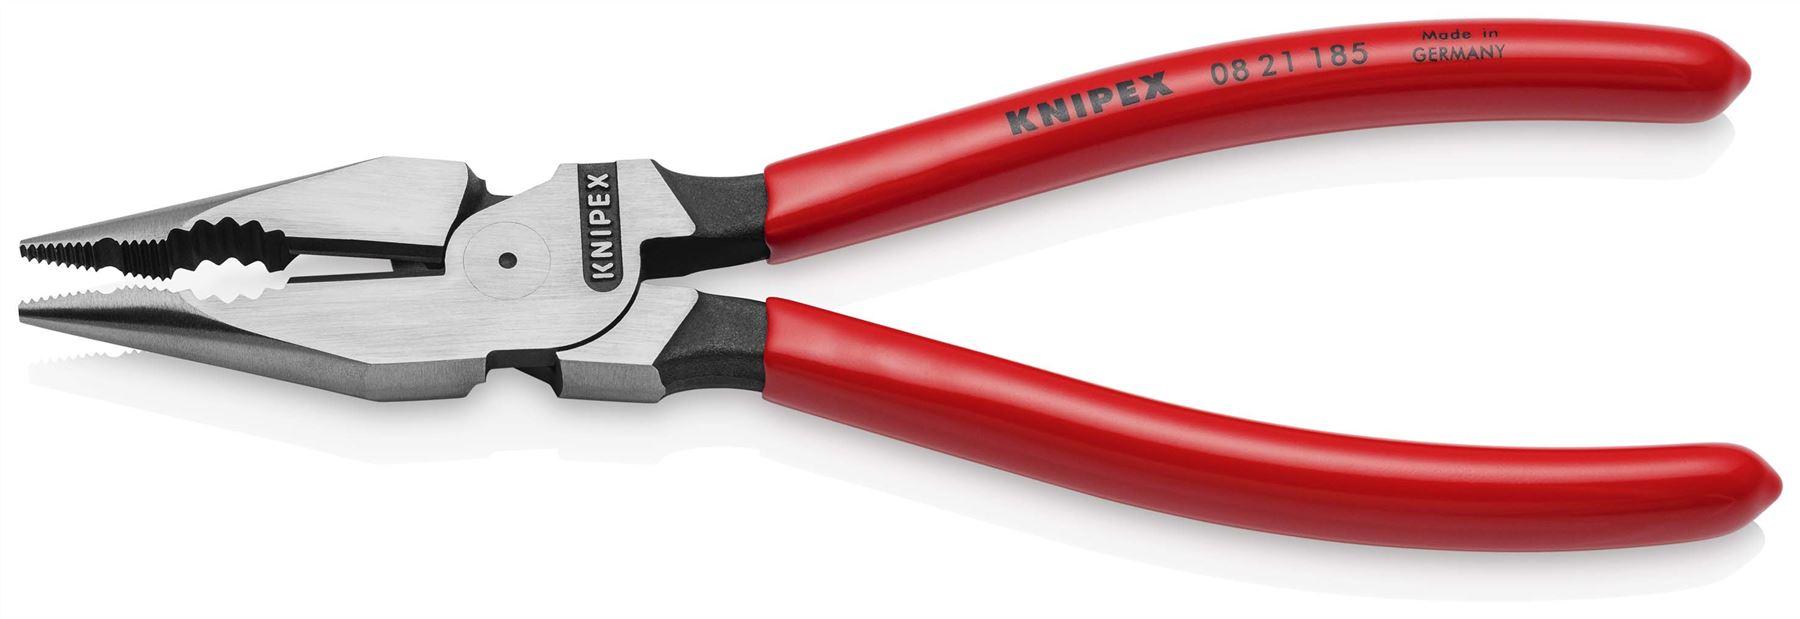 Knipex Needle Nose Combination Pliers 185mm 08 21 185